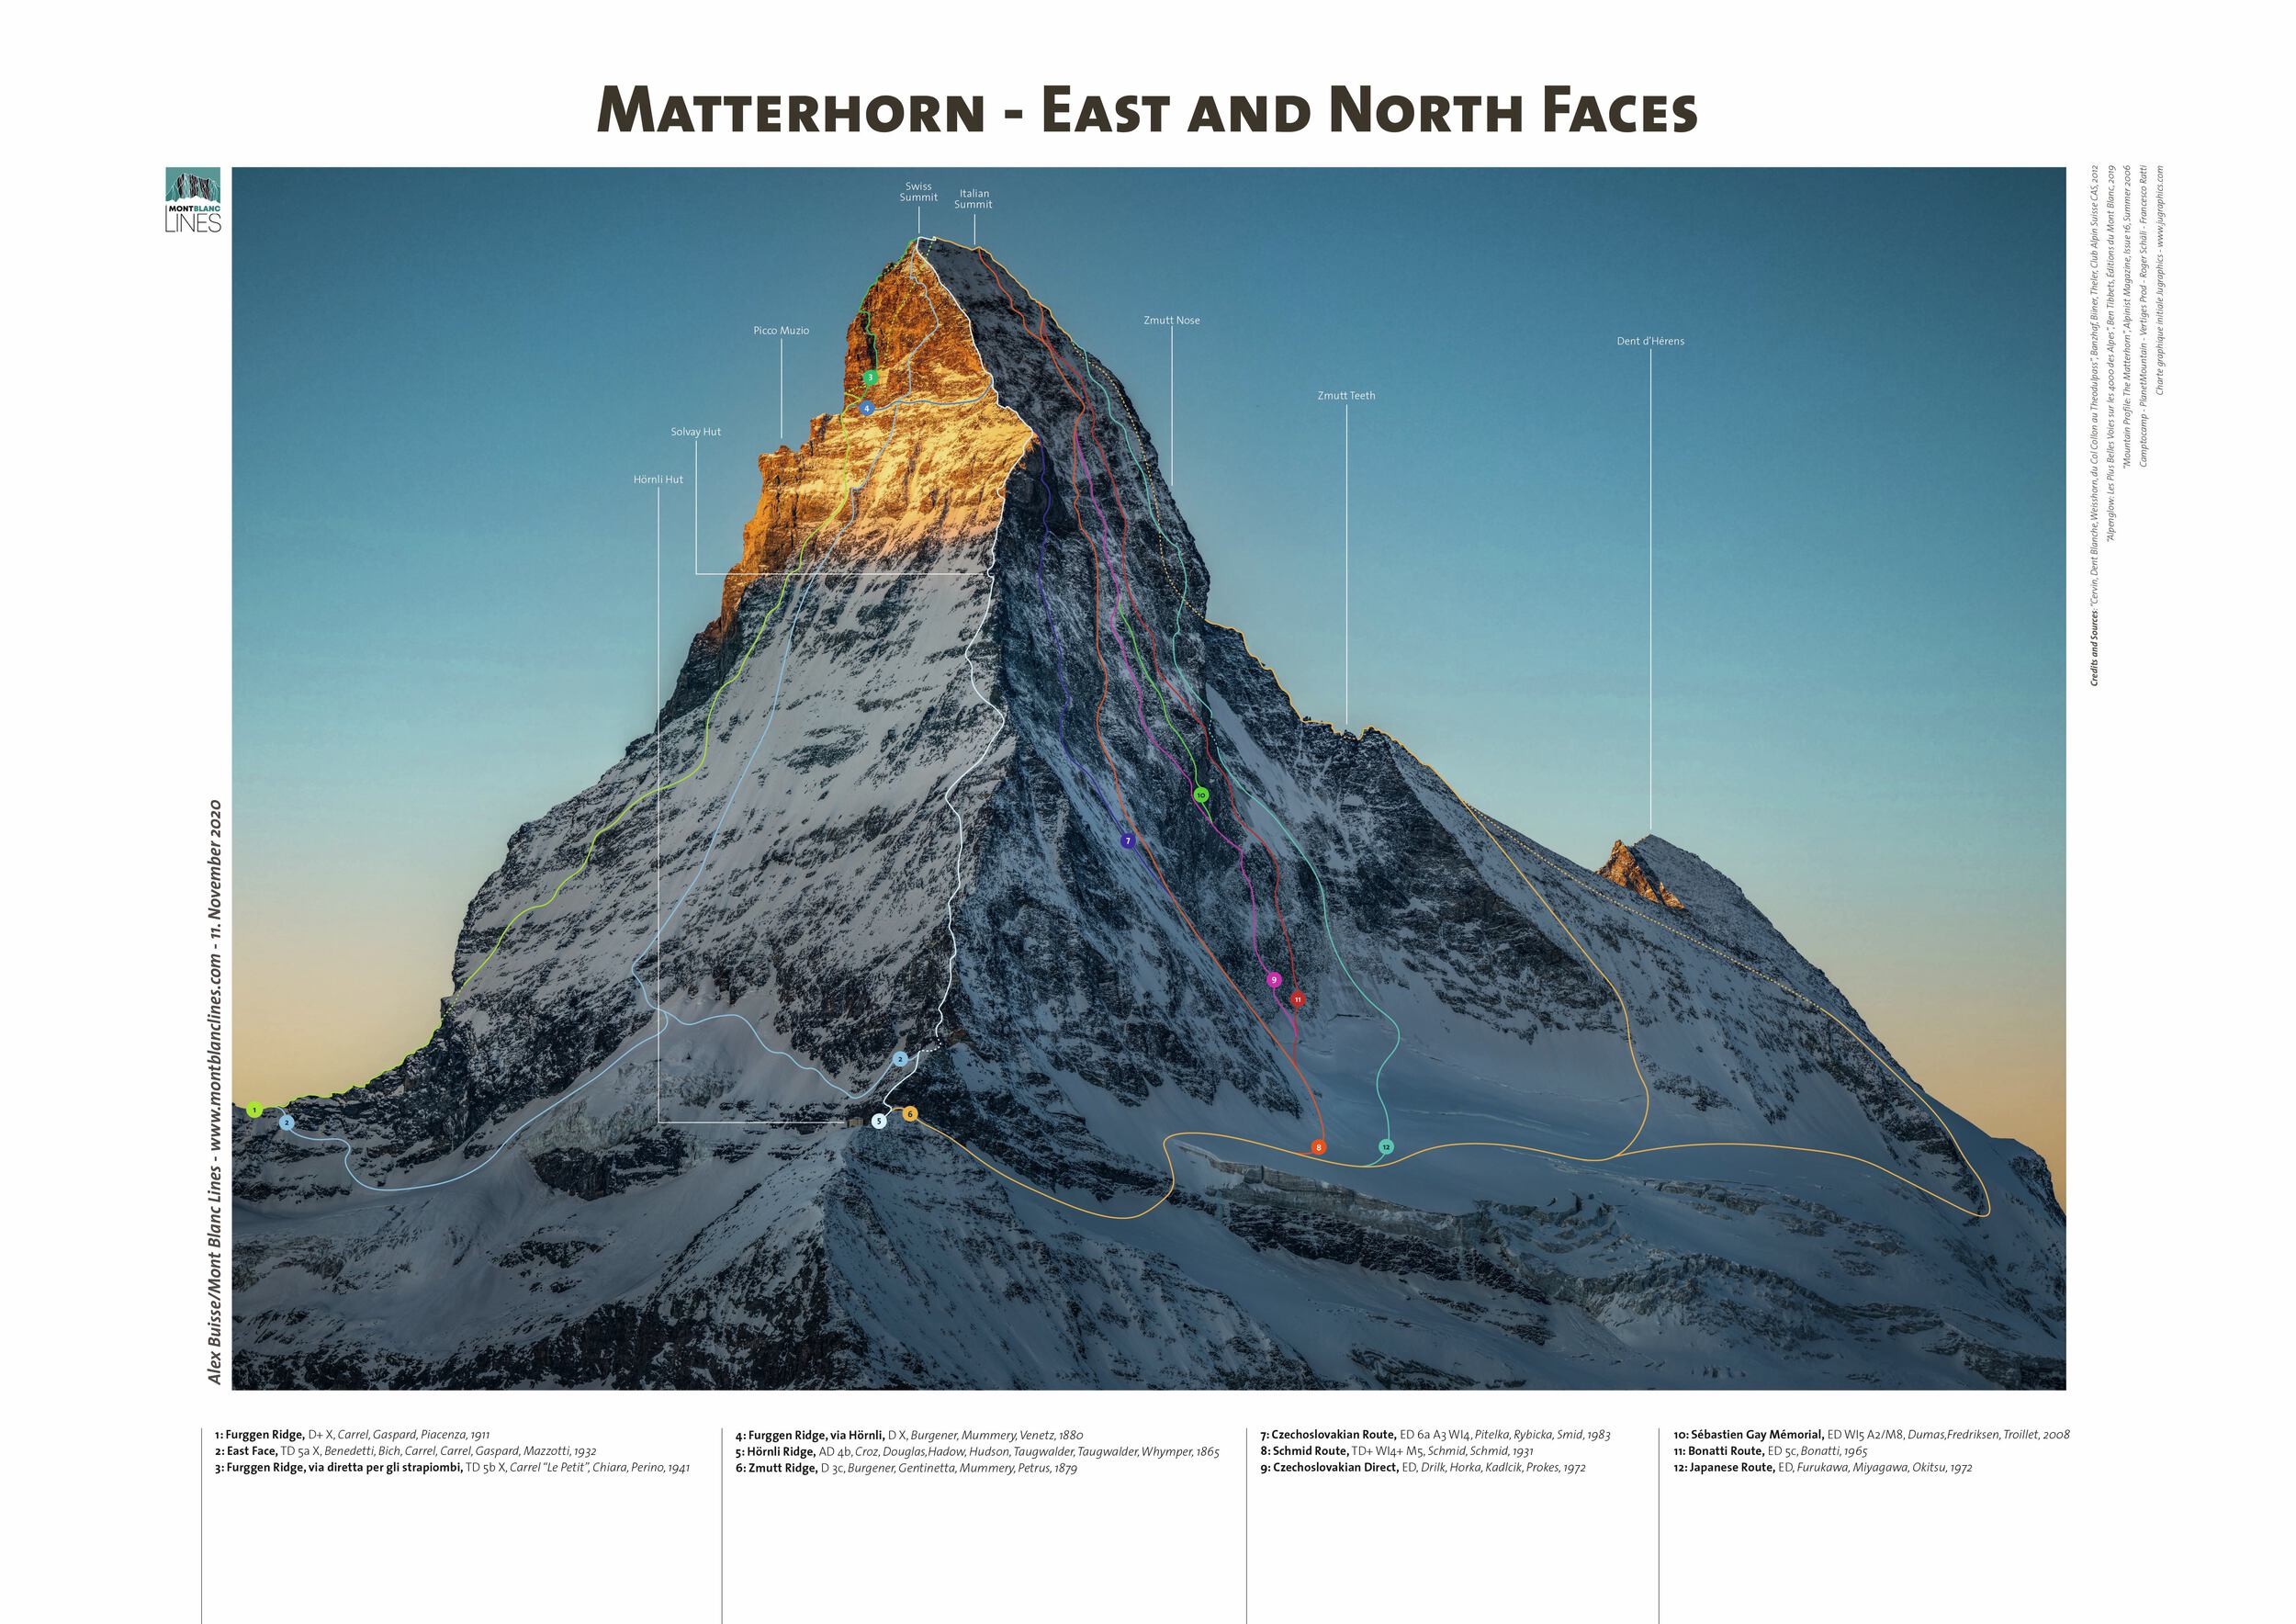 Matterhorn - East and North Faces